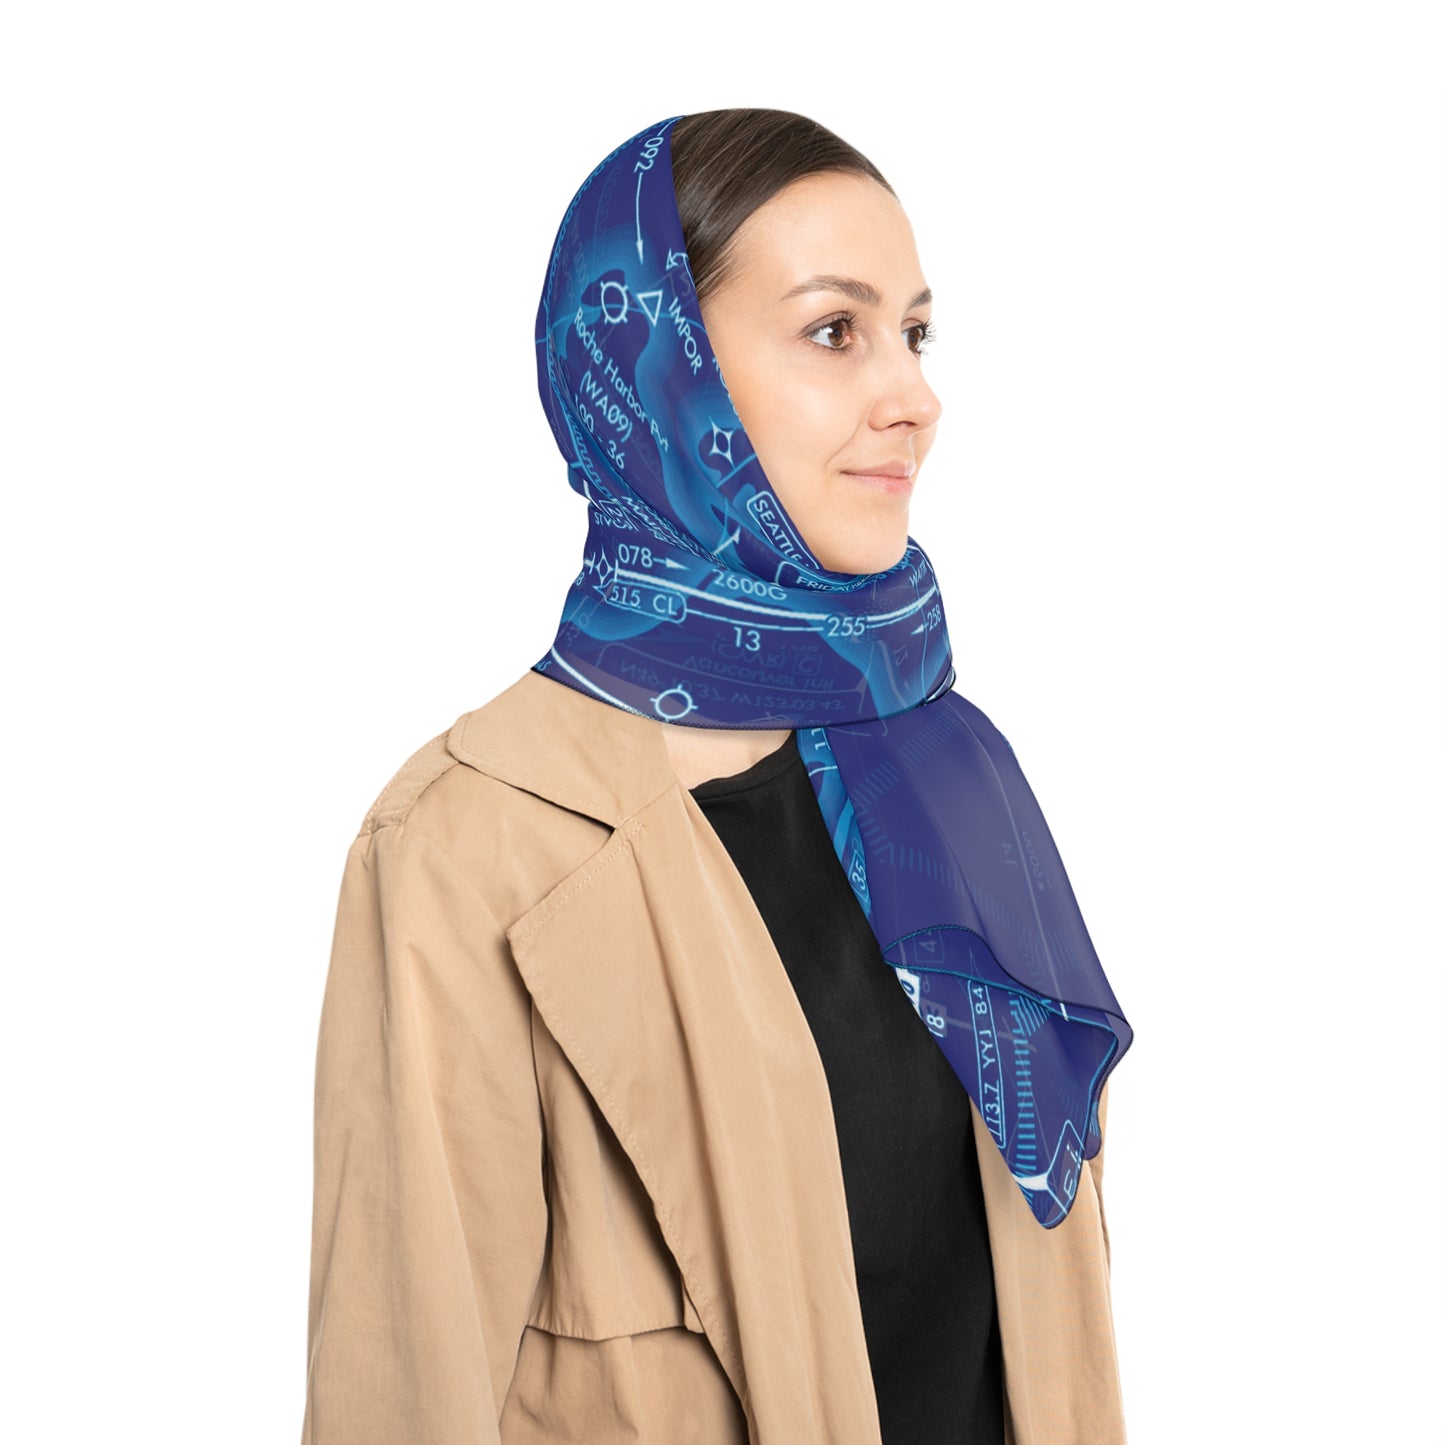 Enroute Low Altitude Chart (blue) poly scarf